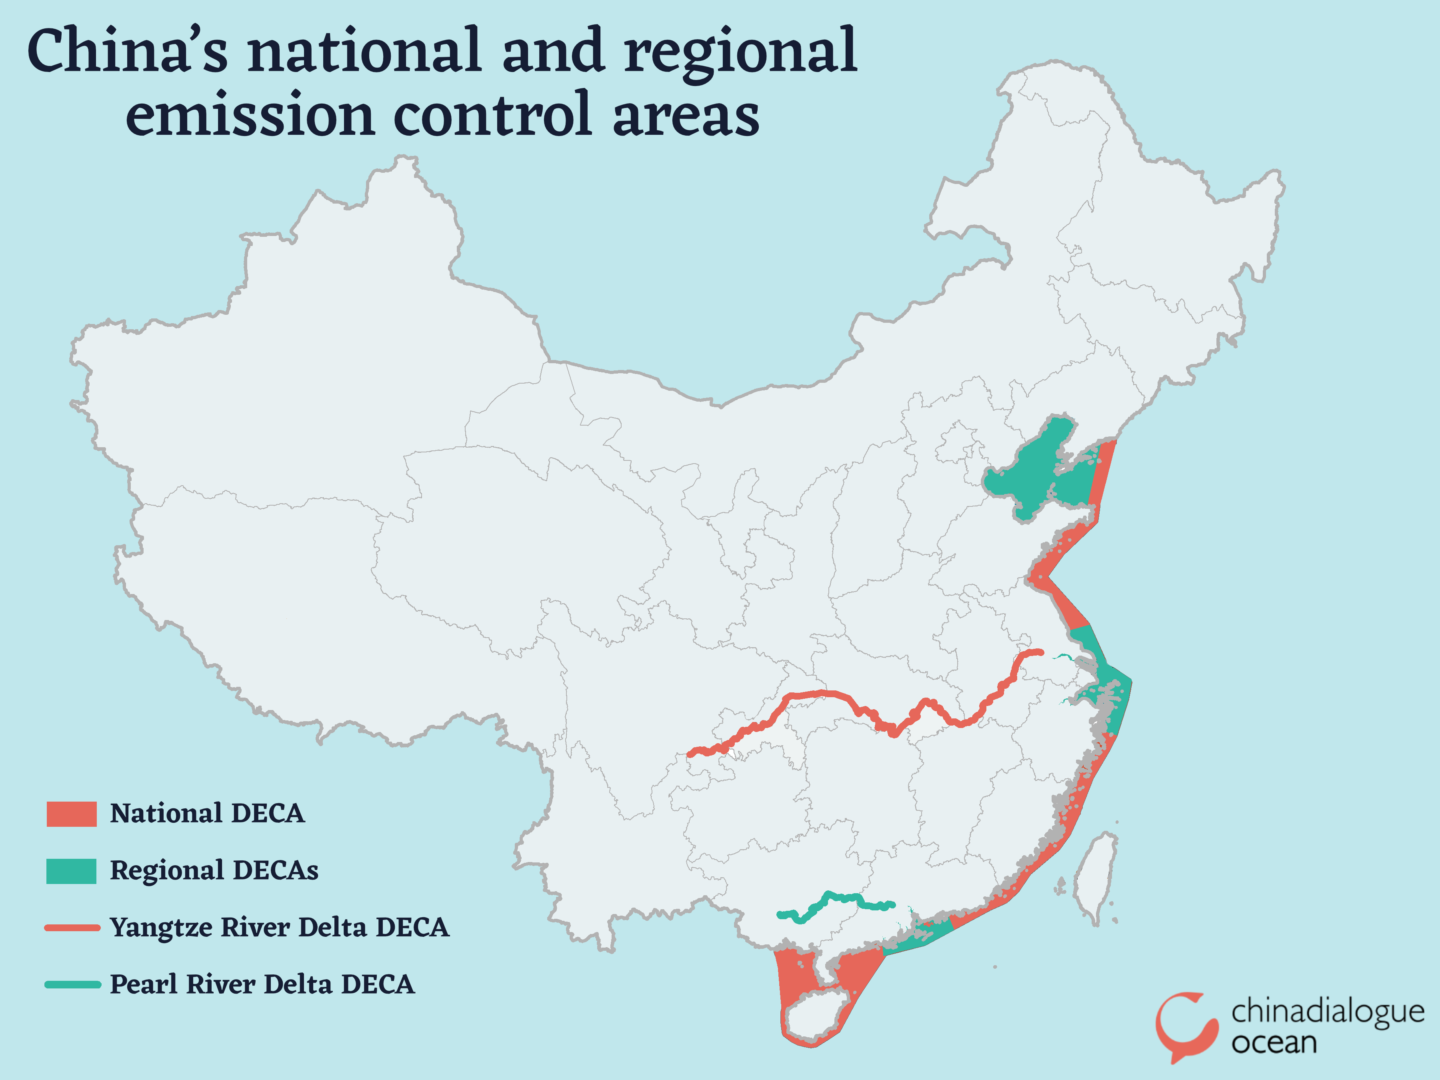 China’s national and regional emission control areas, ship emissions, shipping emissions, emissions from ships